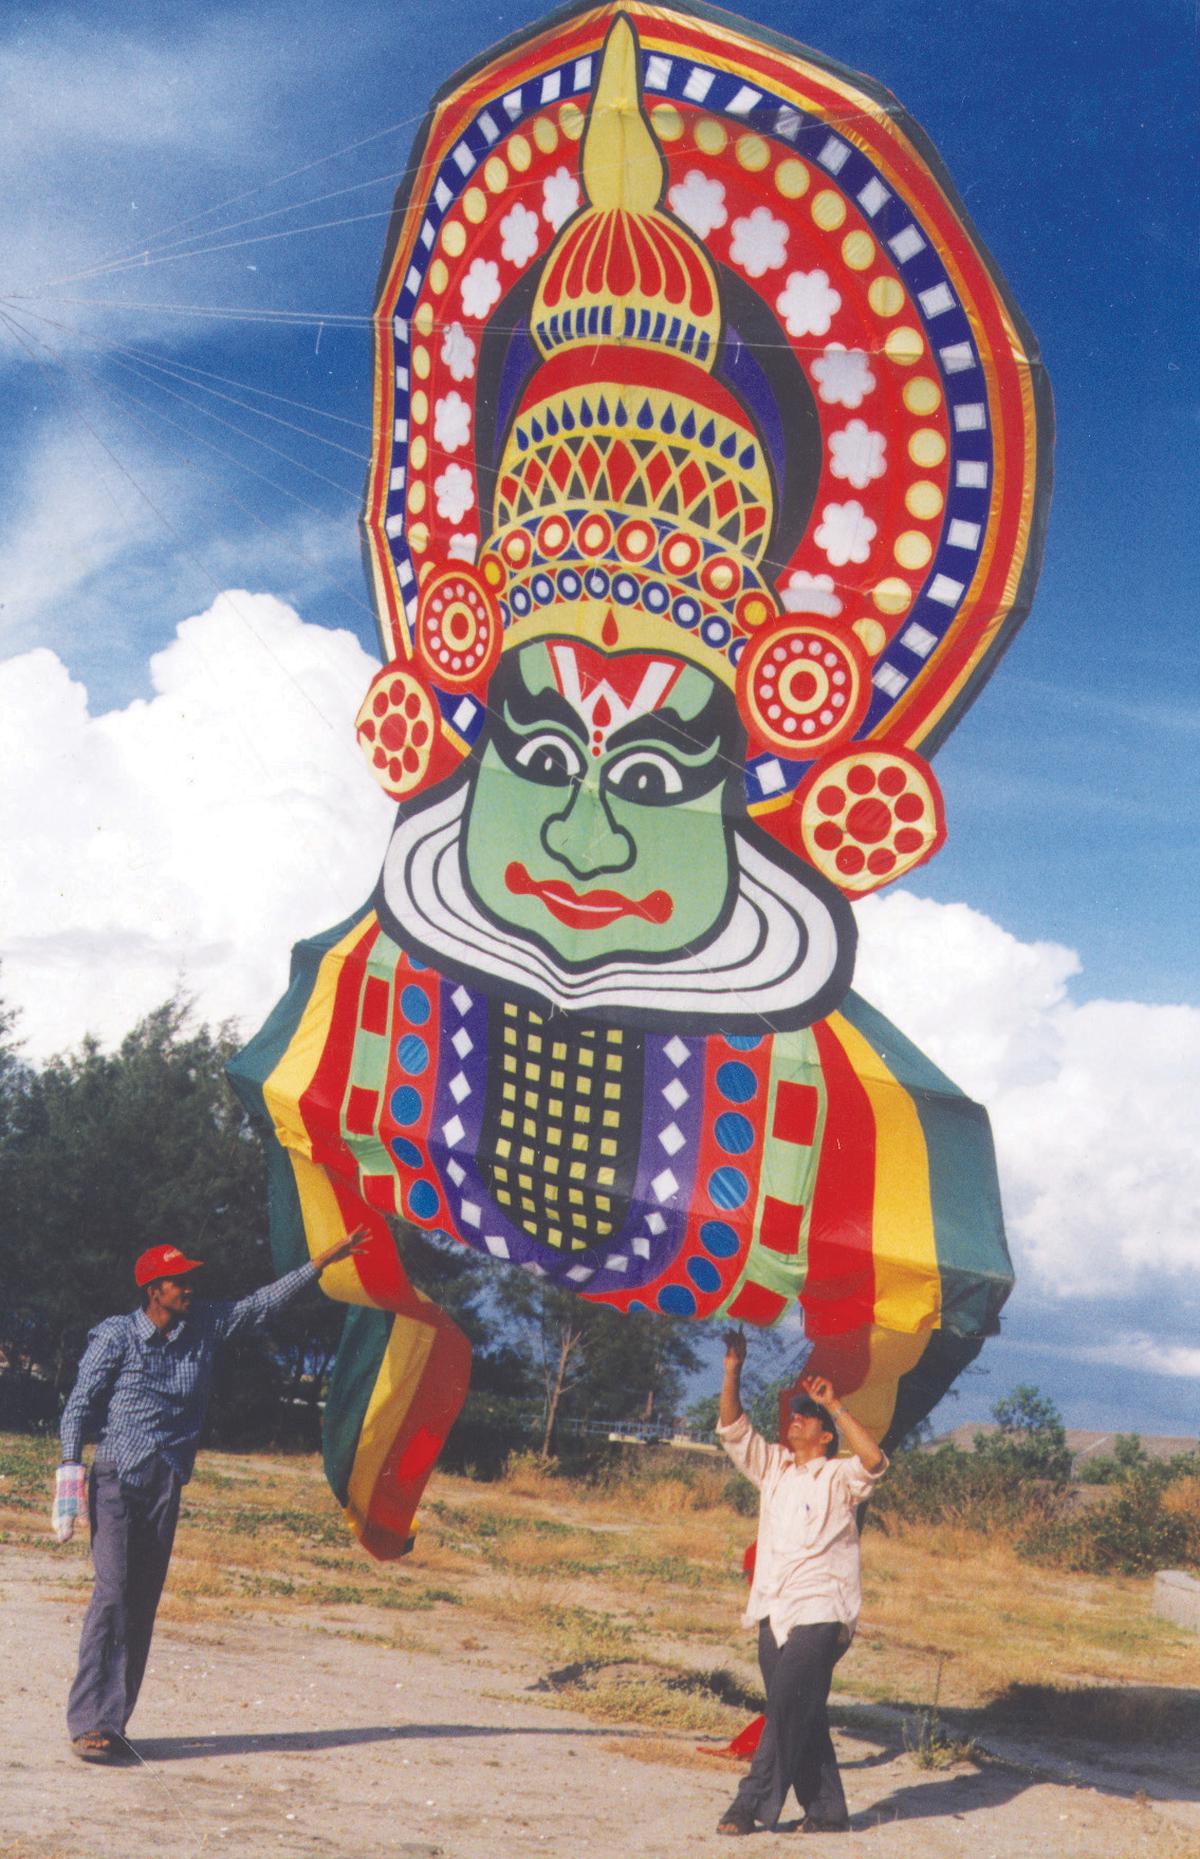 Every country has their own technique of making kites 